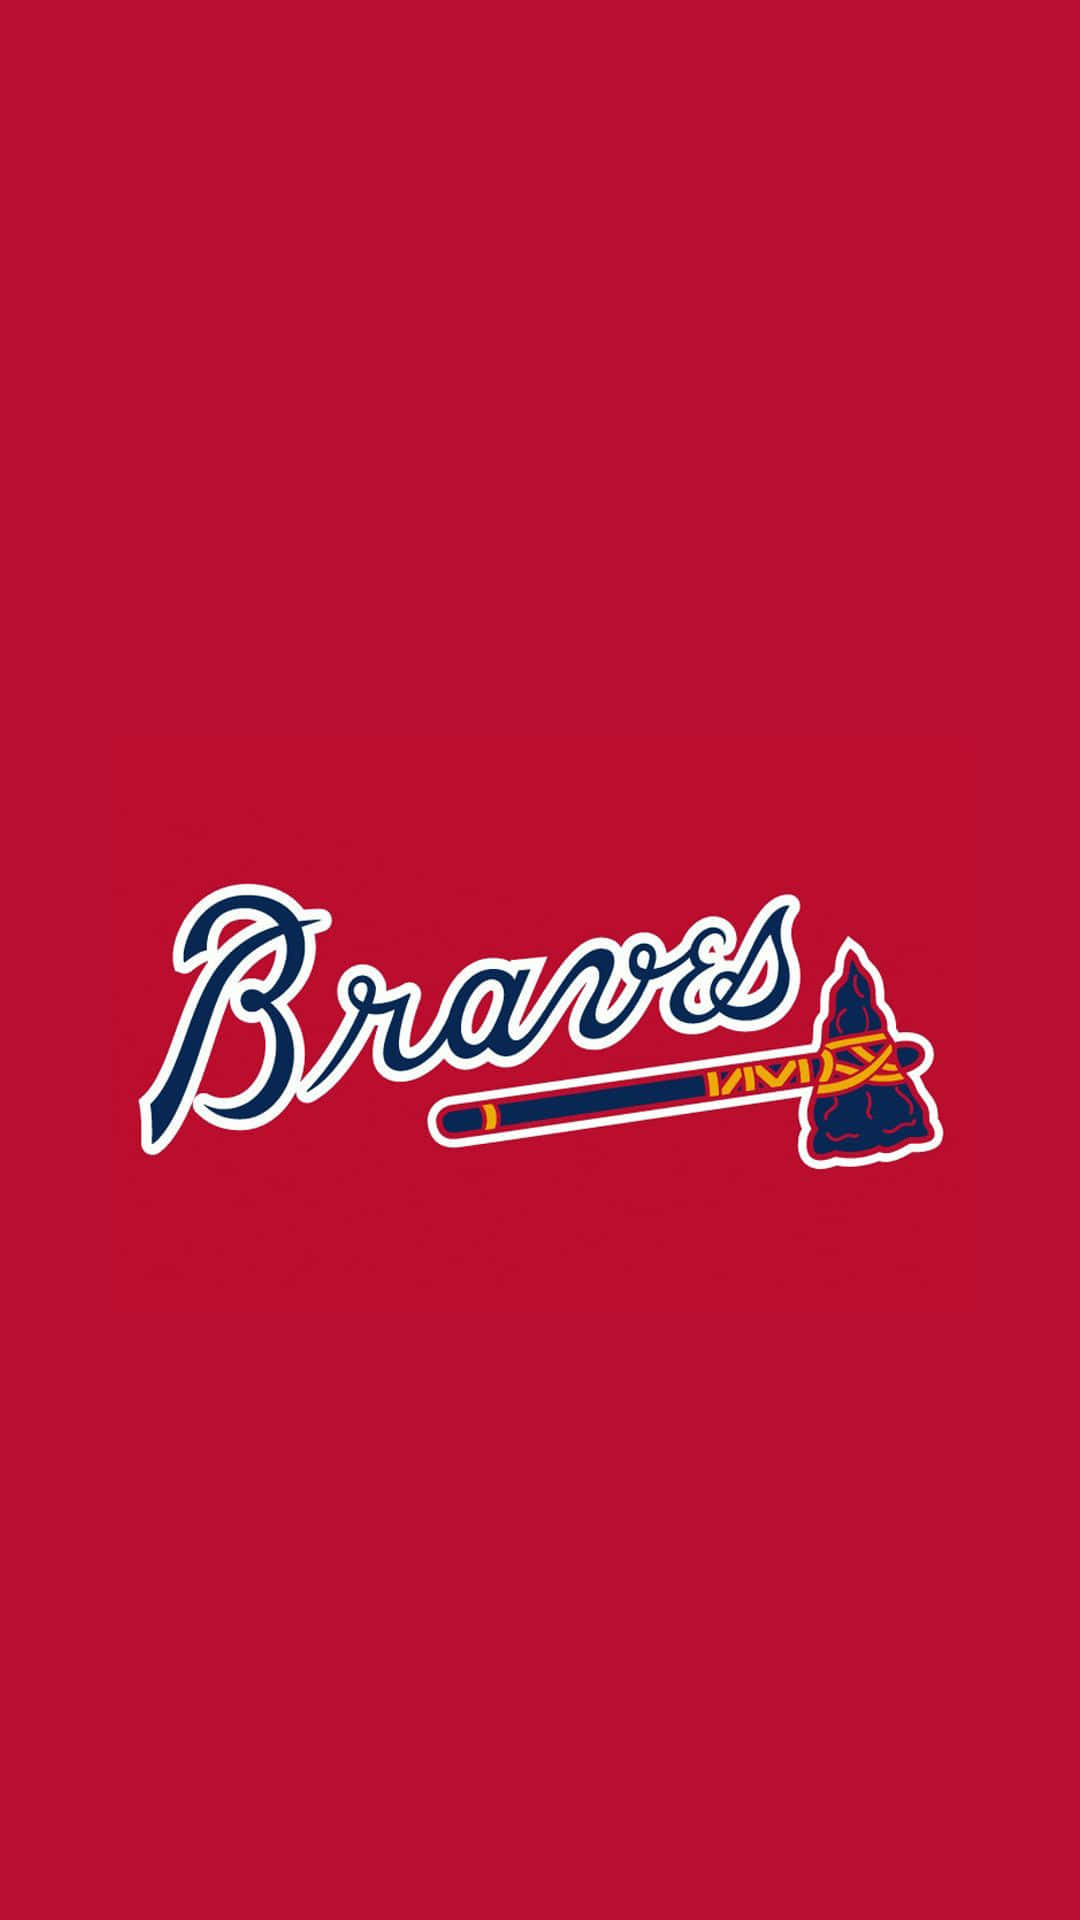 Support Your Team with an Official Atlanta Braves Iphone Wallpaper Wallpaper